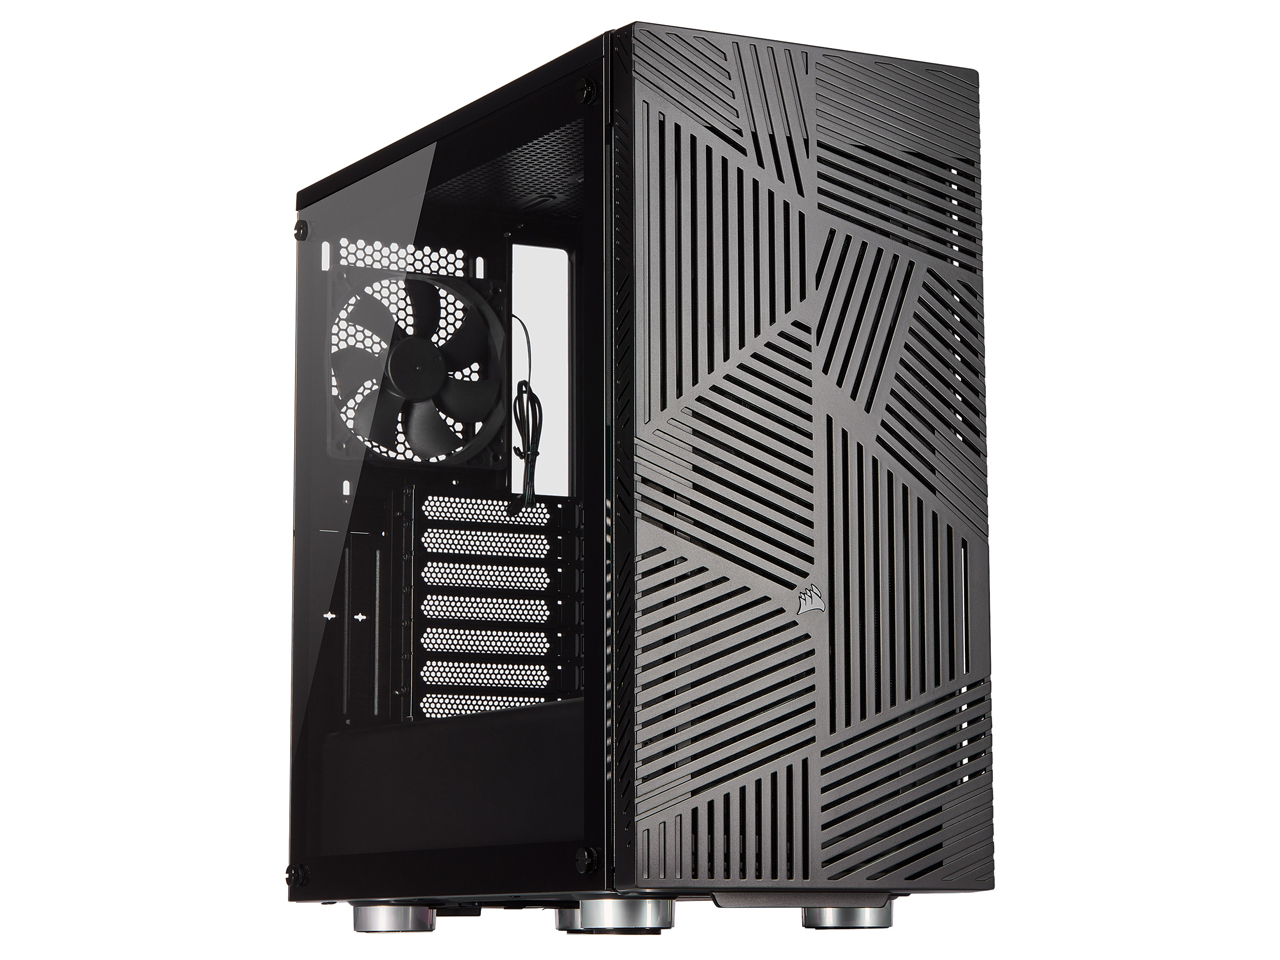 275R Airflow Tempered Glass